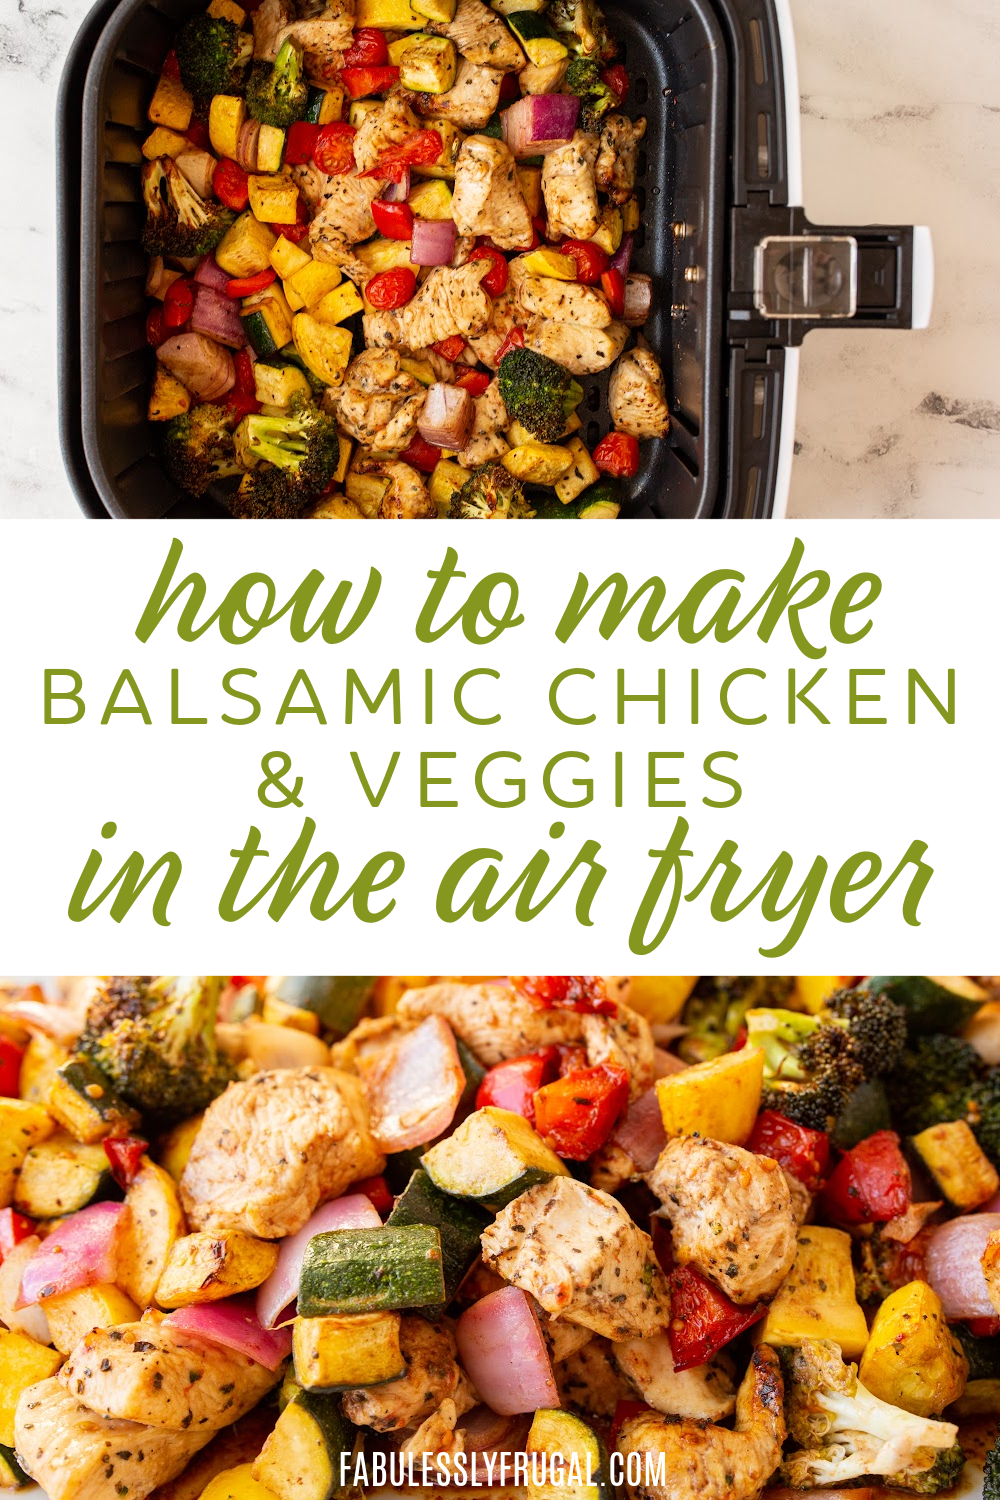 https://fabulesslyfrugal.com/wp-content/uploads/2022/01/how-to-make-balsamic-chicken-and-vegetables-in-the-air-fryer-1.png